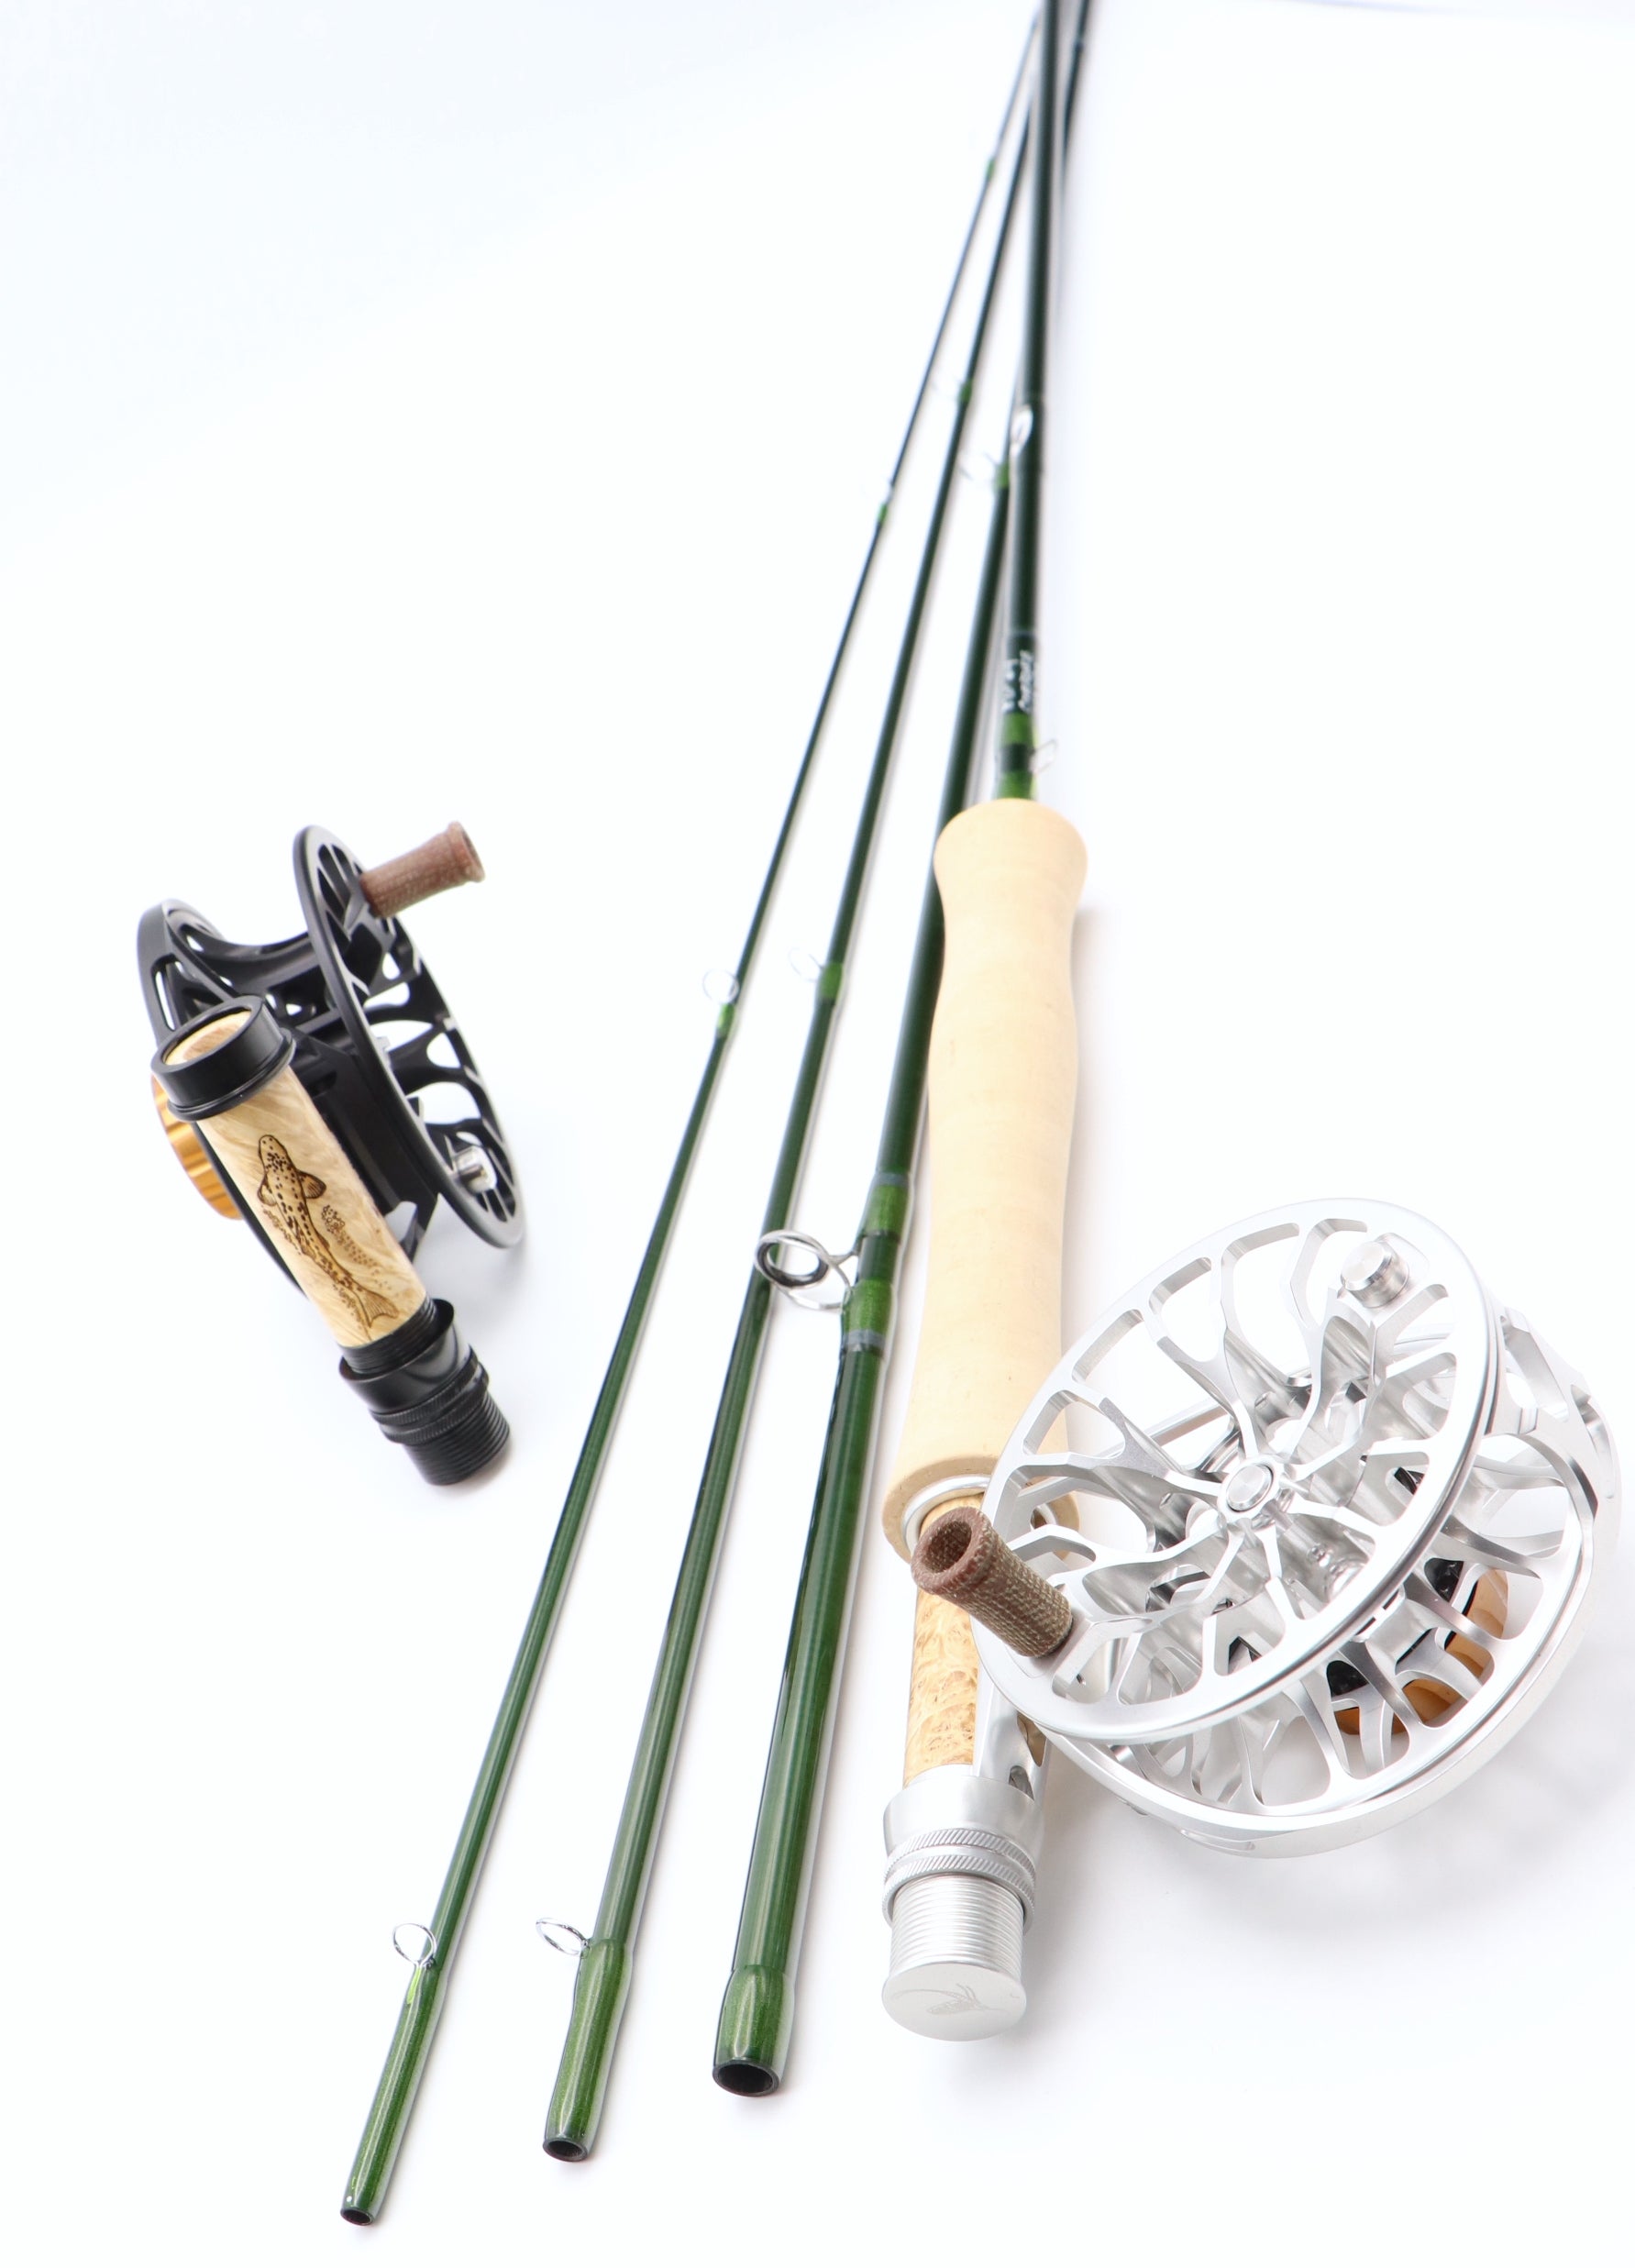 Coherence Fly Rod 4,5,6, model for freshwater, 4 piece Medium Fast